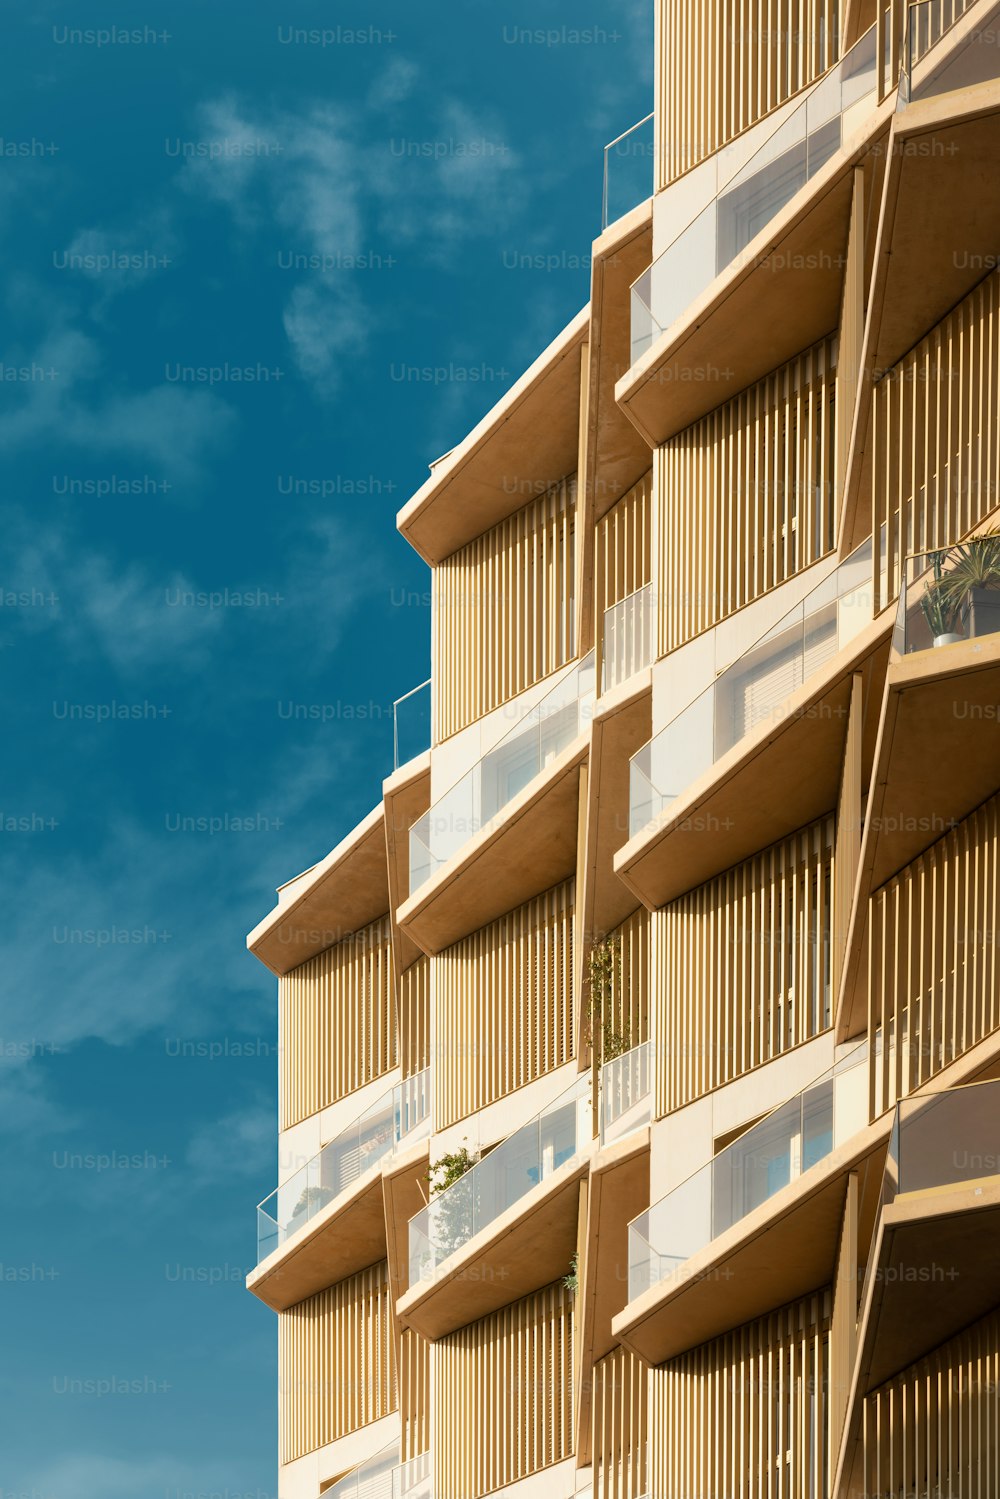 a tall building with balconies and balconies on the balconies